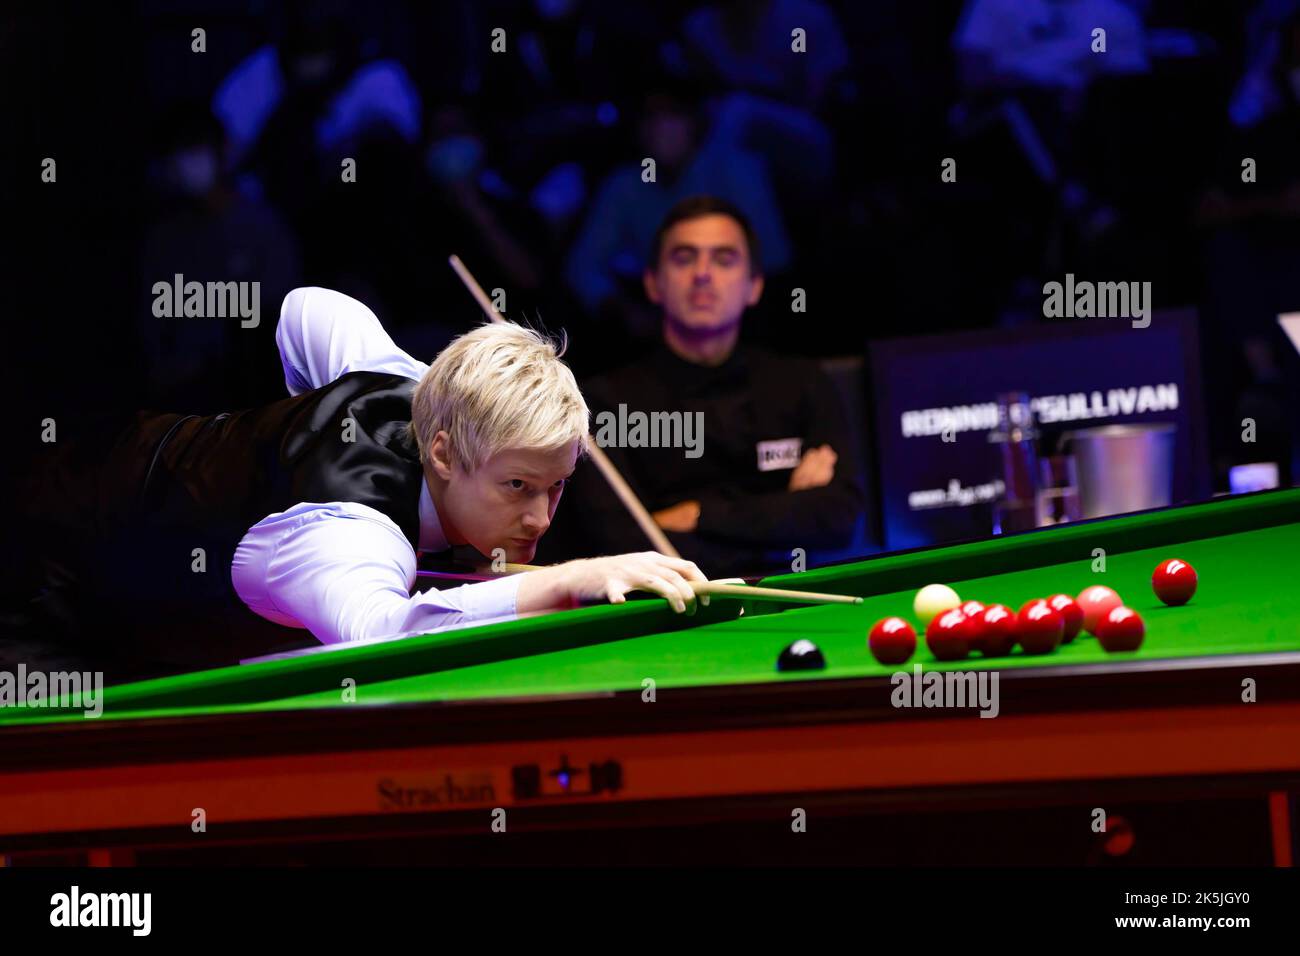 Neil Robertson seen in action during the semi-final match against Ronnie OíSullivan on Day 3 of Hong Kong Masters snooker tournament 2022